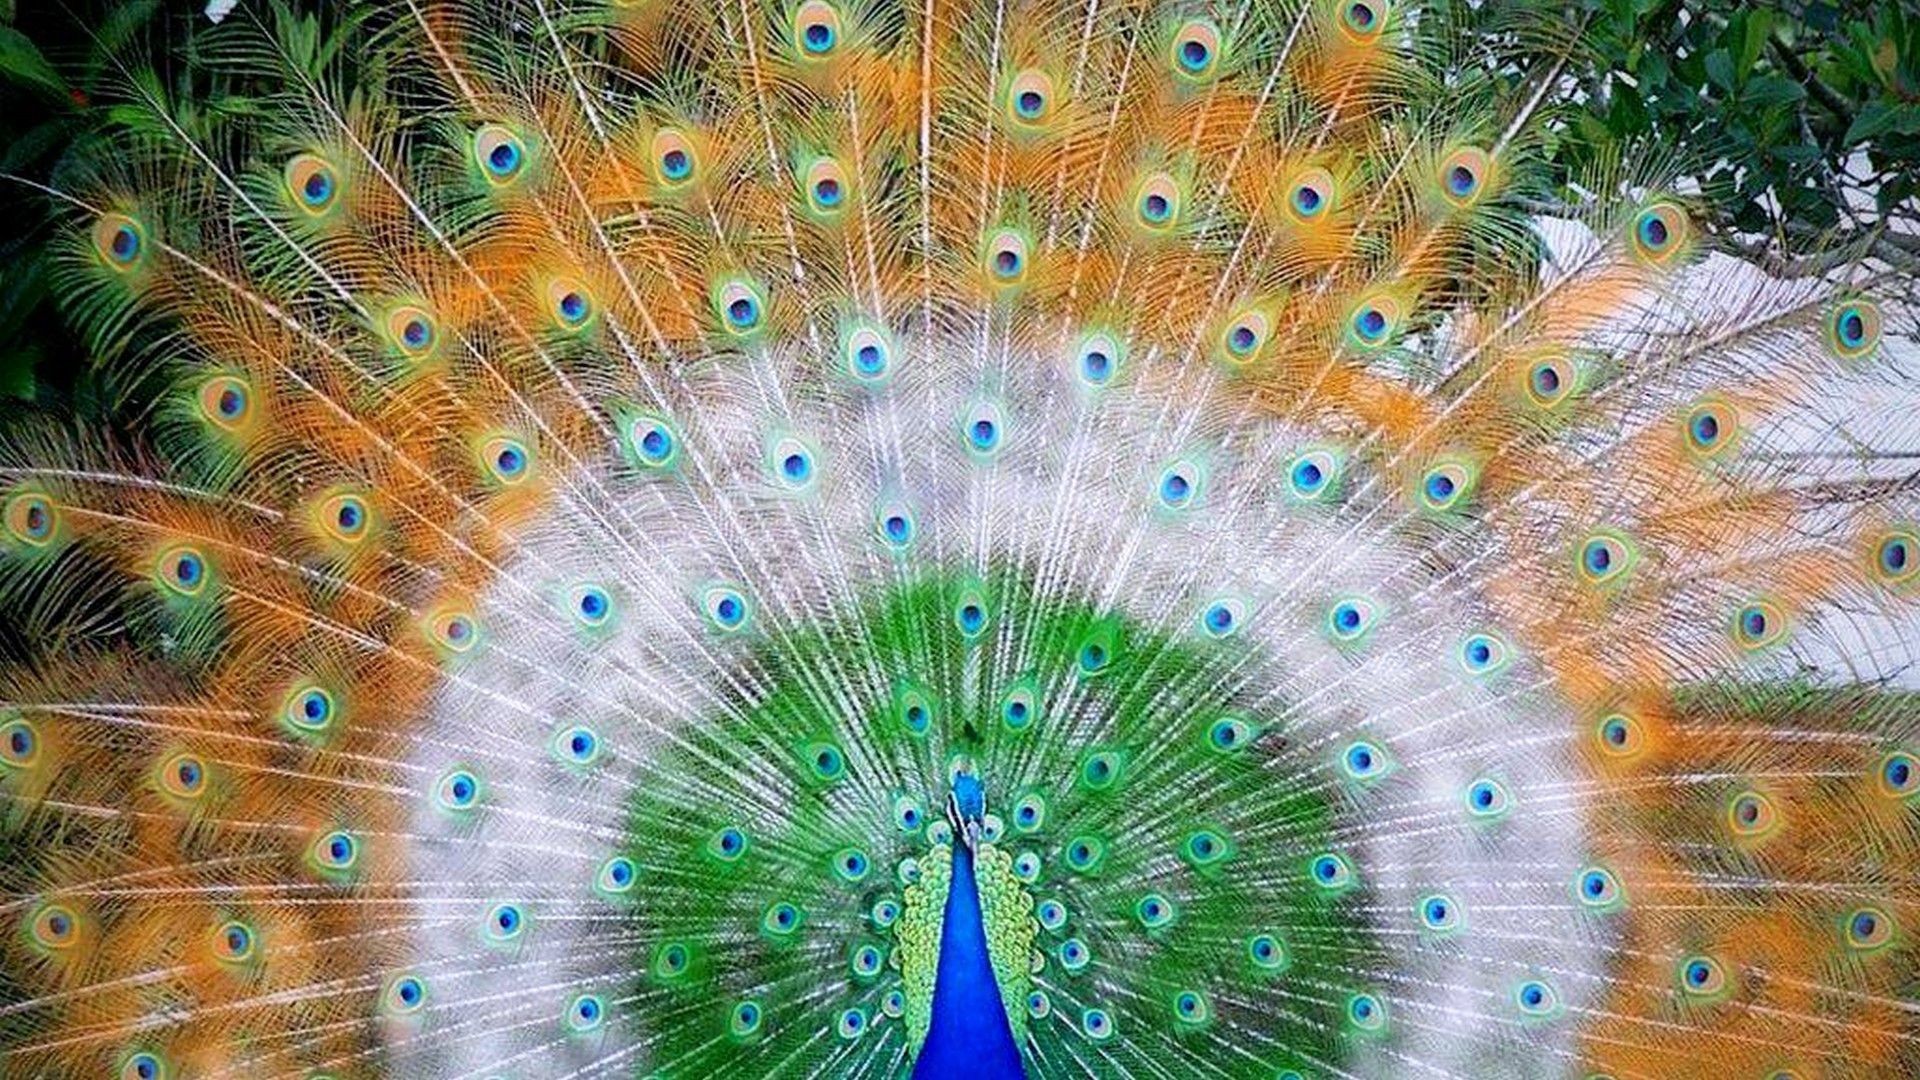 peacock images hd